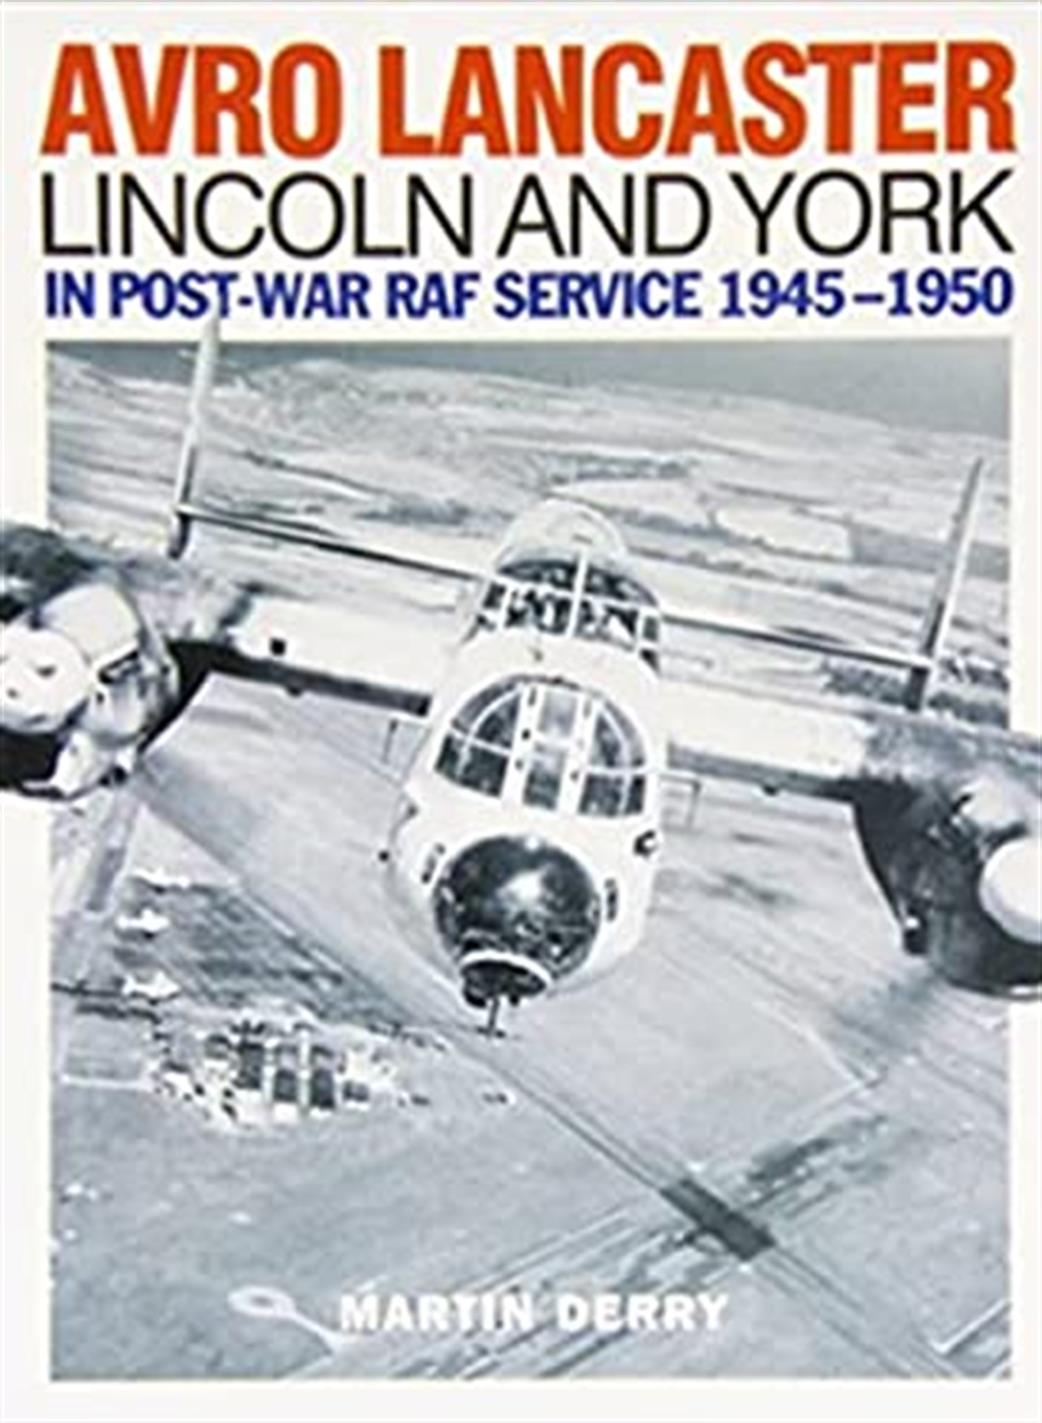 9781905414130 Avro Lancaster, Lincoln & York in post war Service 1945 to 1950 by Martin Derry